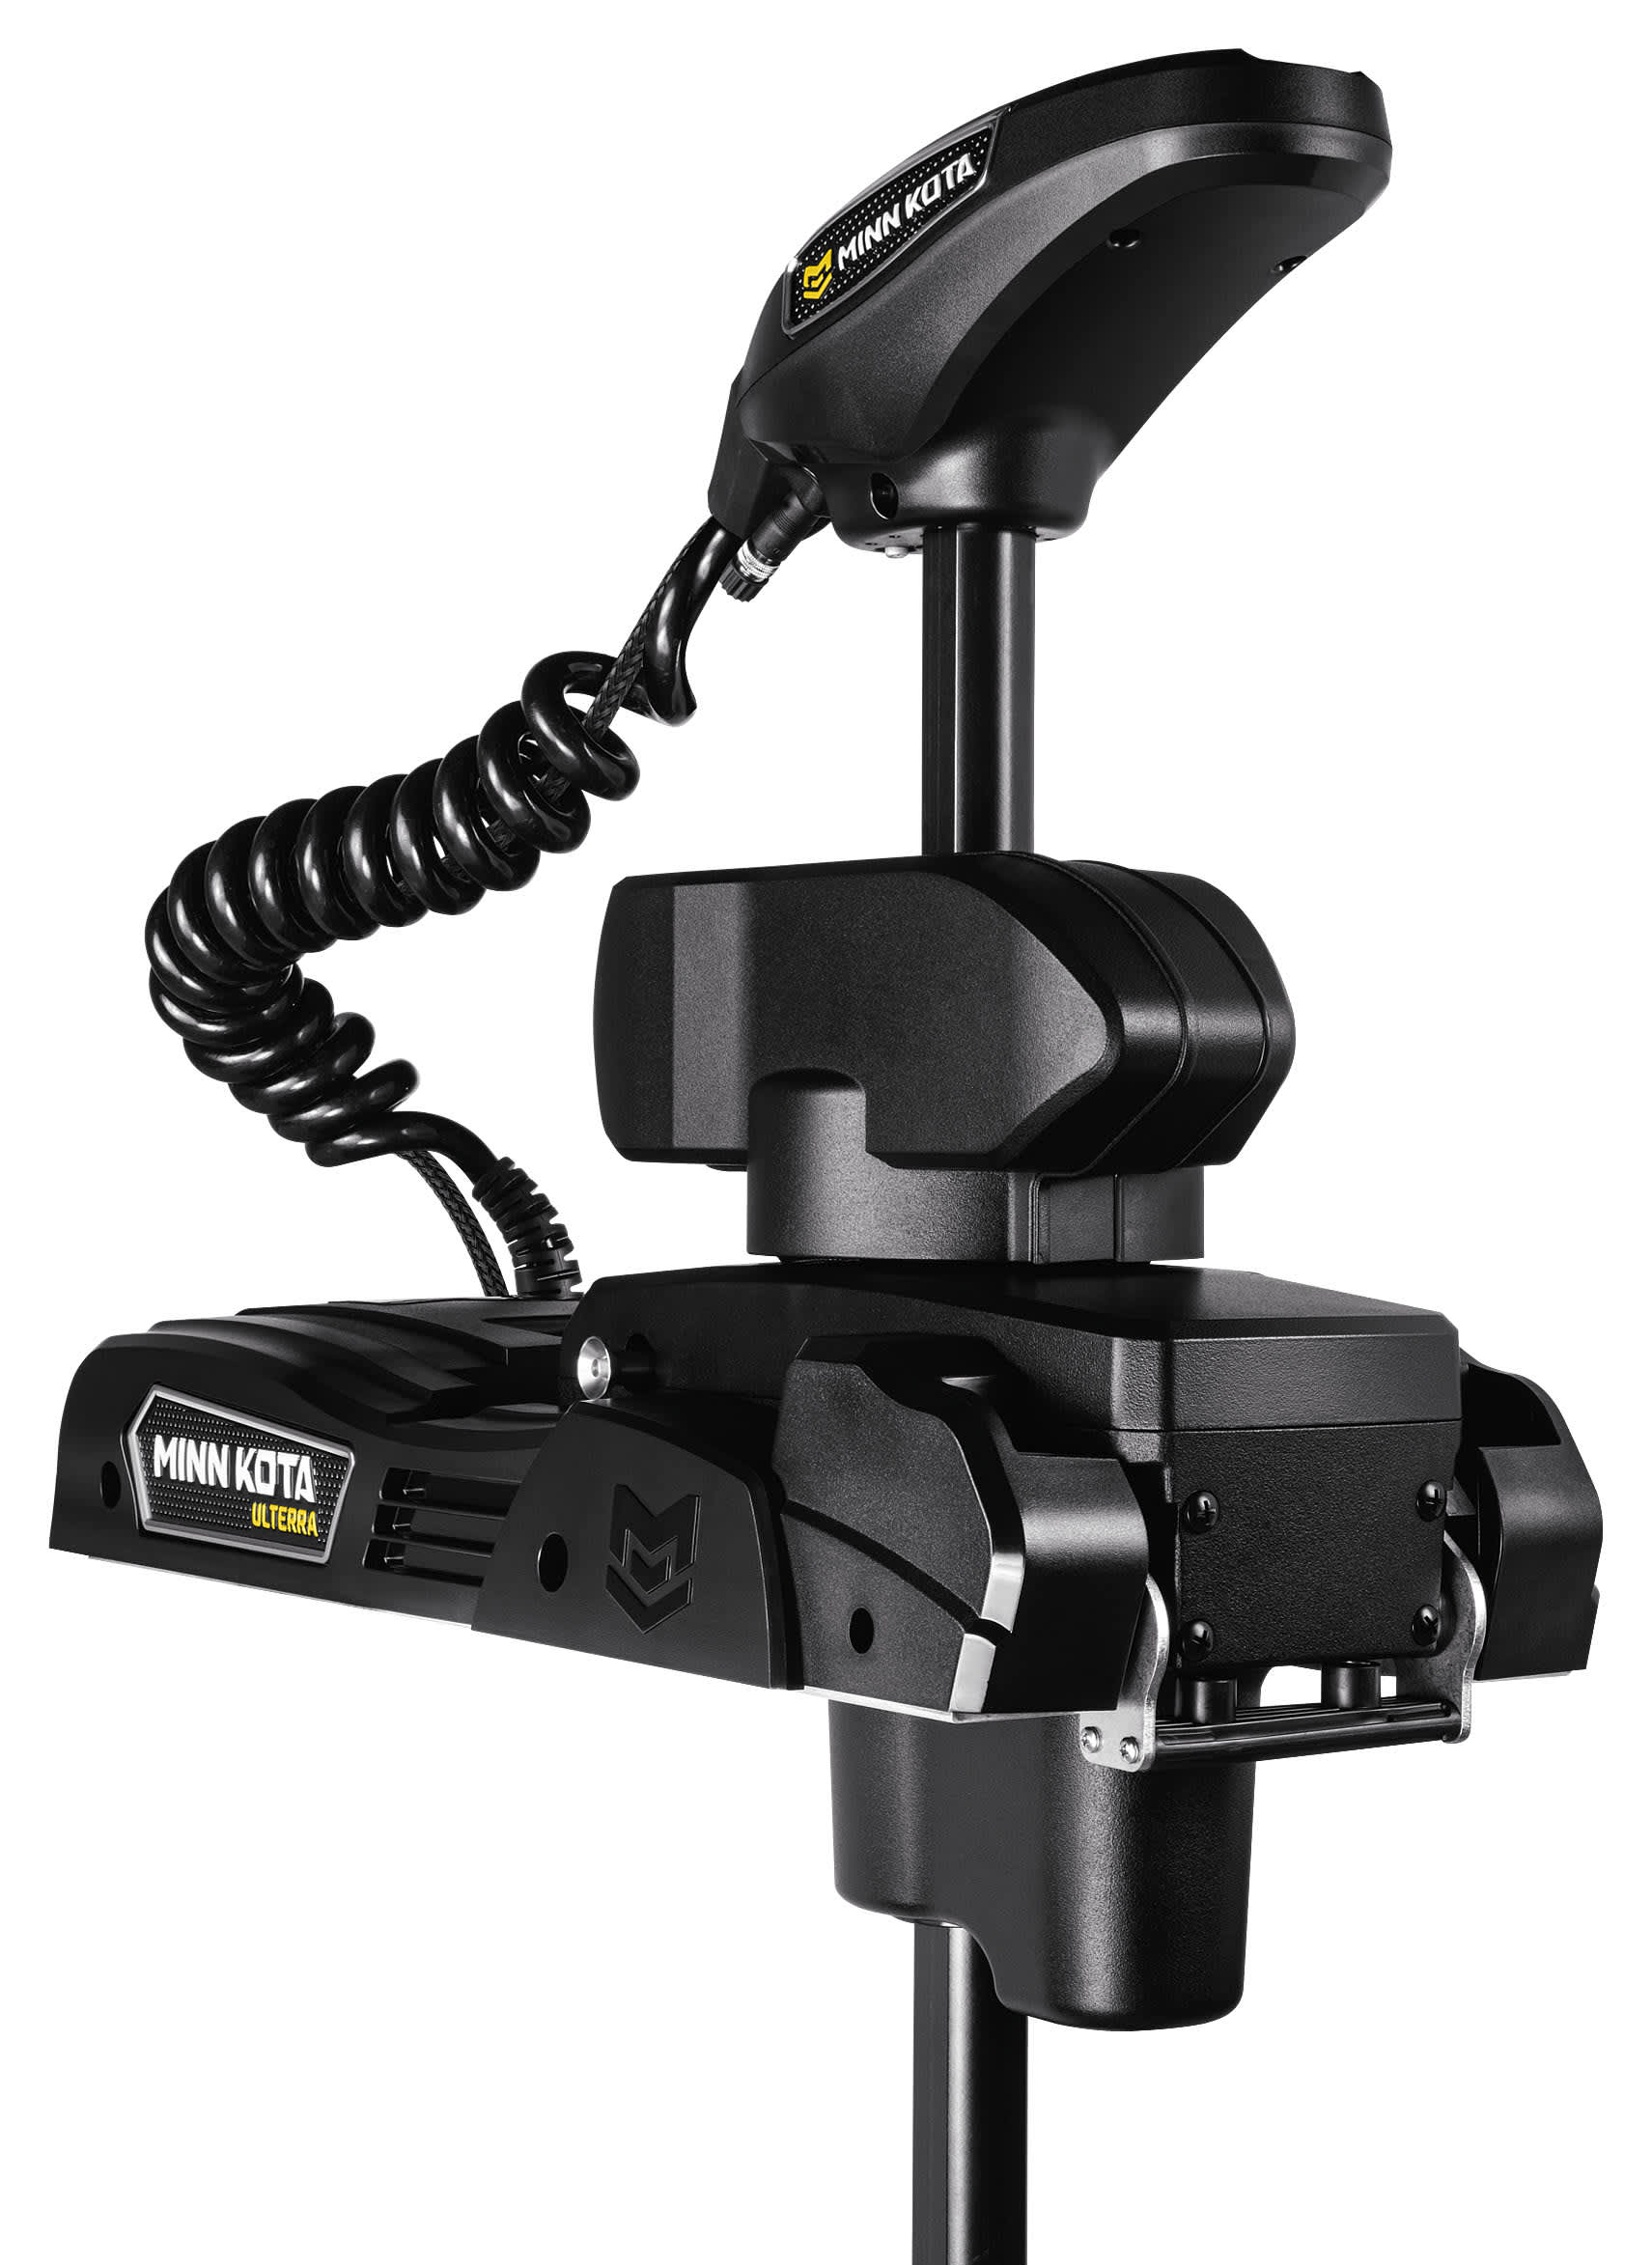 Minn Kota® Ulterra® Quest-Series Bow-Mount Trolling Motor with Dual Spectrum CHIRP, Foot Pedal and Wireless Remote - 60'' Shaft